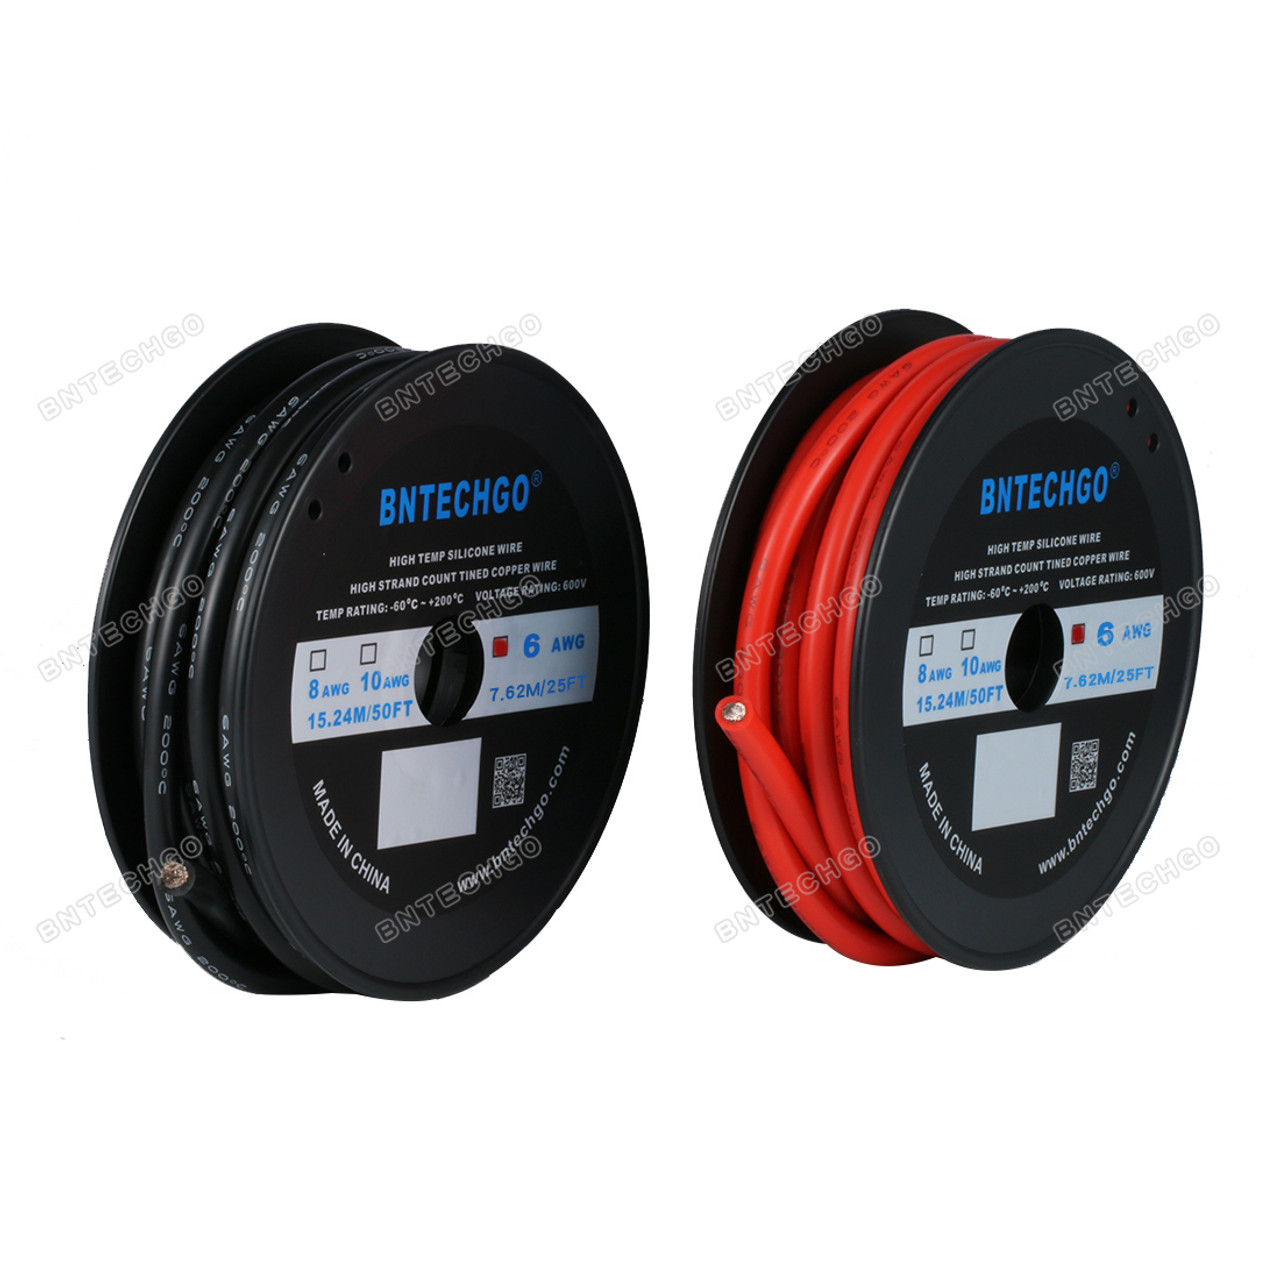 BNTECHGO 28 Gauge Silicone Wire Spool 50 feet(25 ft Black and 25 ft Red)  Ultra Flexible High Temp 200 deg C 600V 28 AWG Stranded Tinned Copper Wire